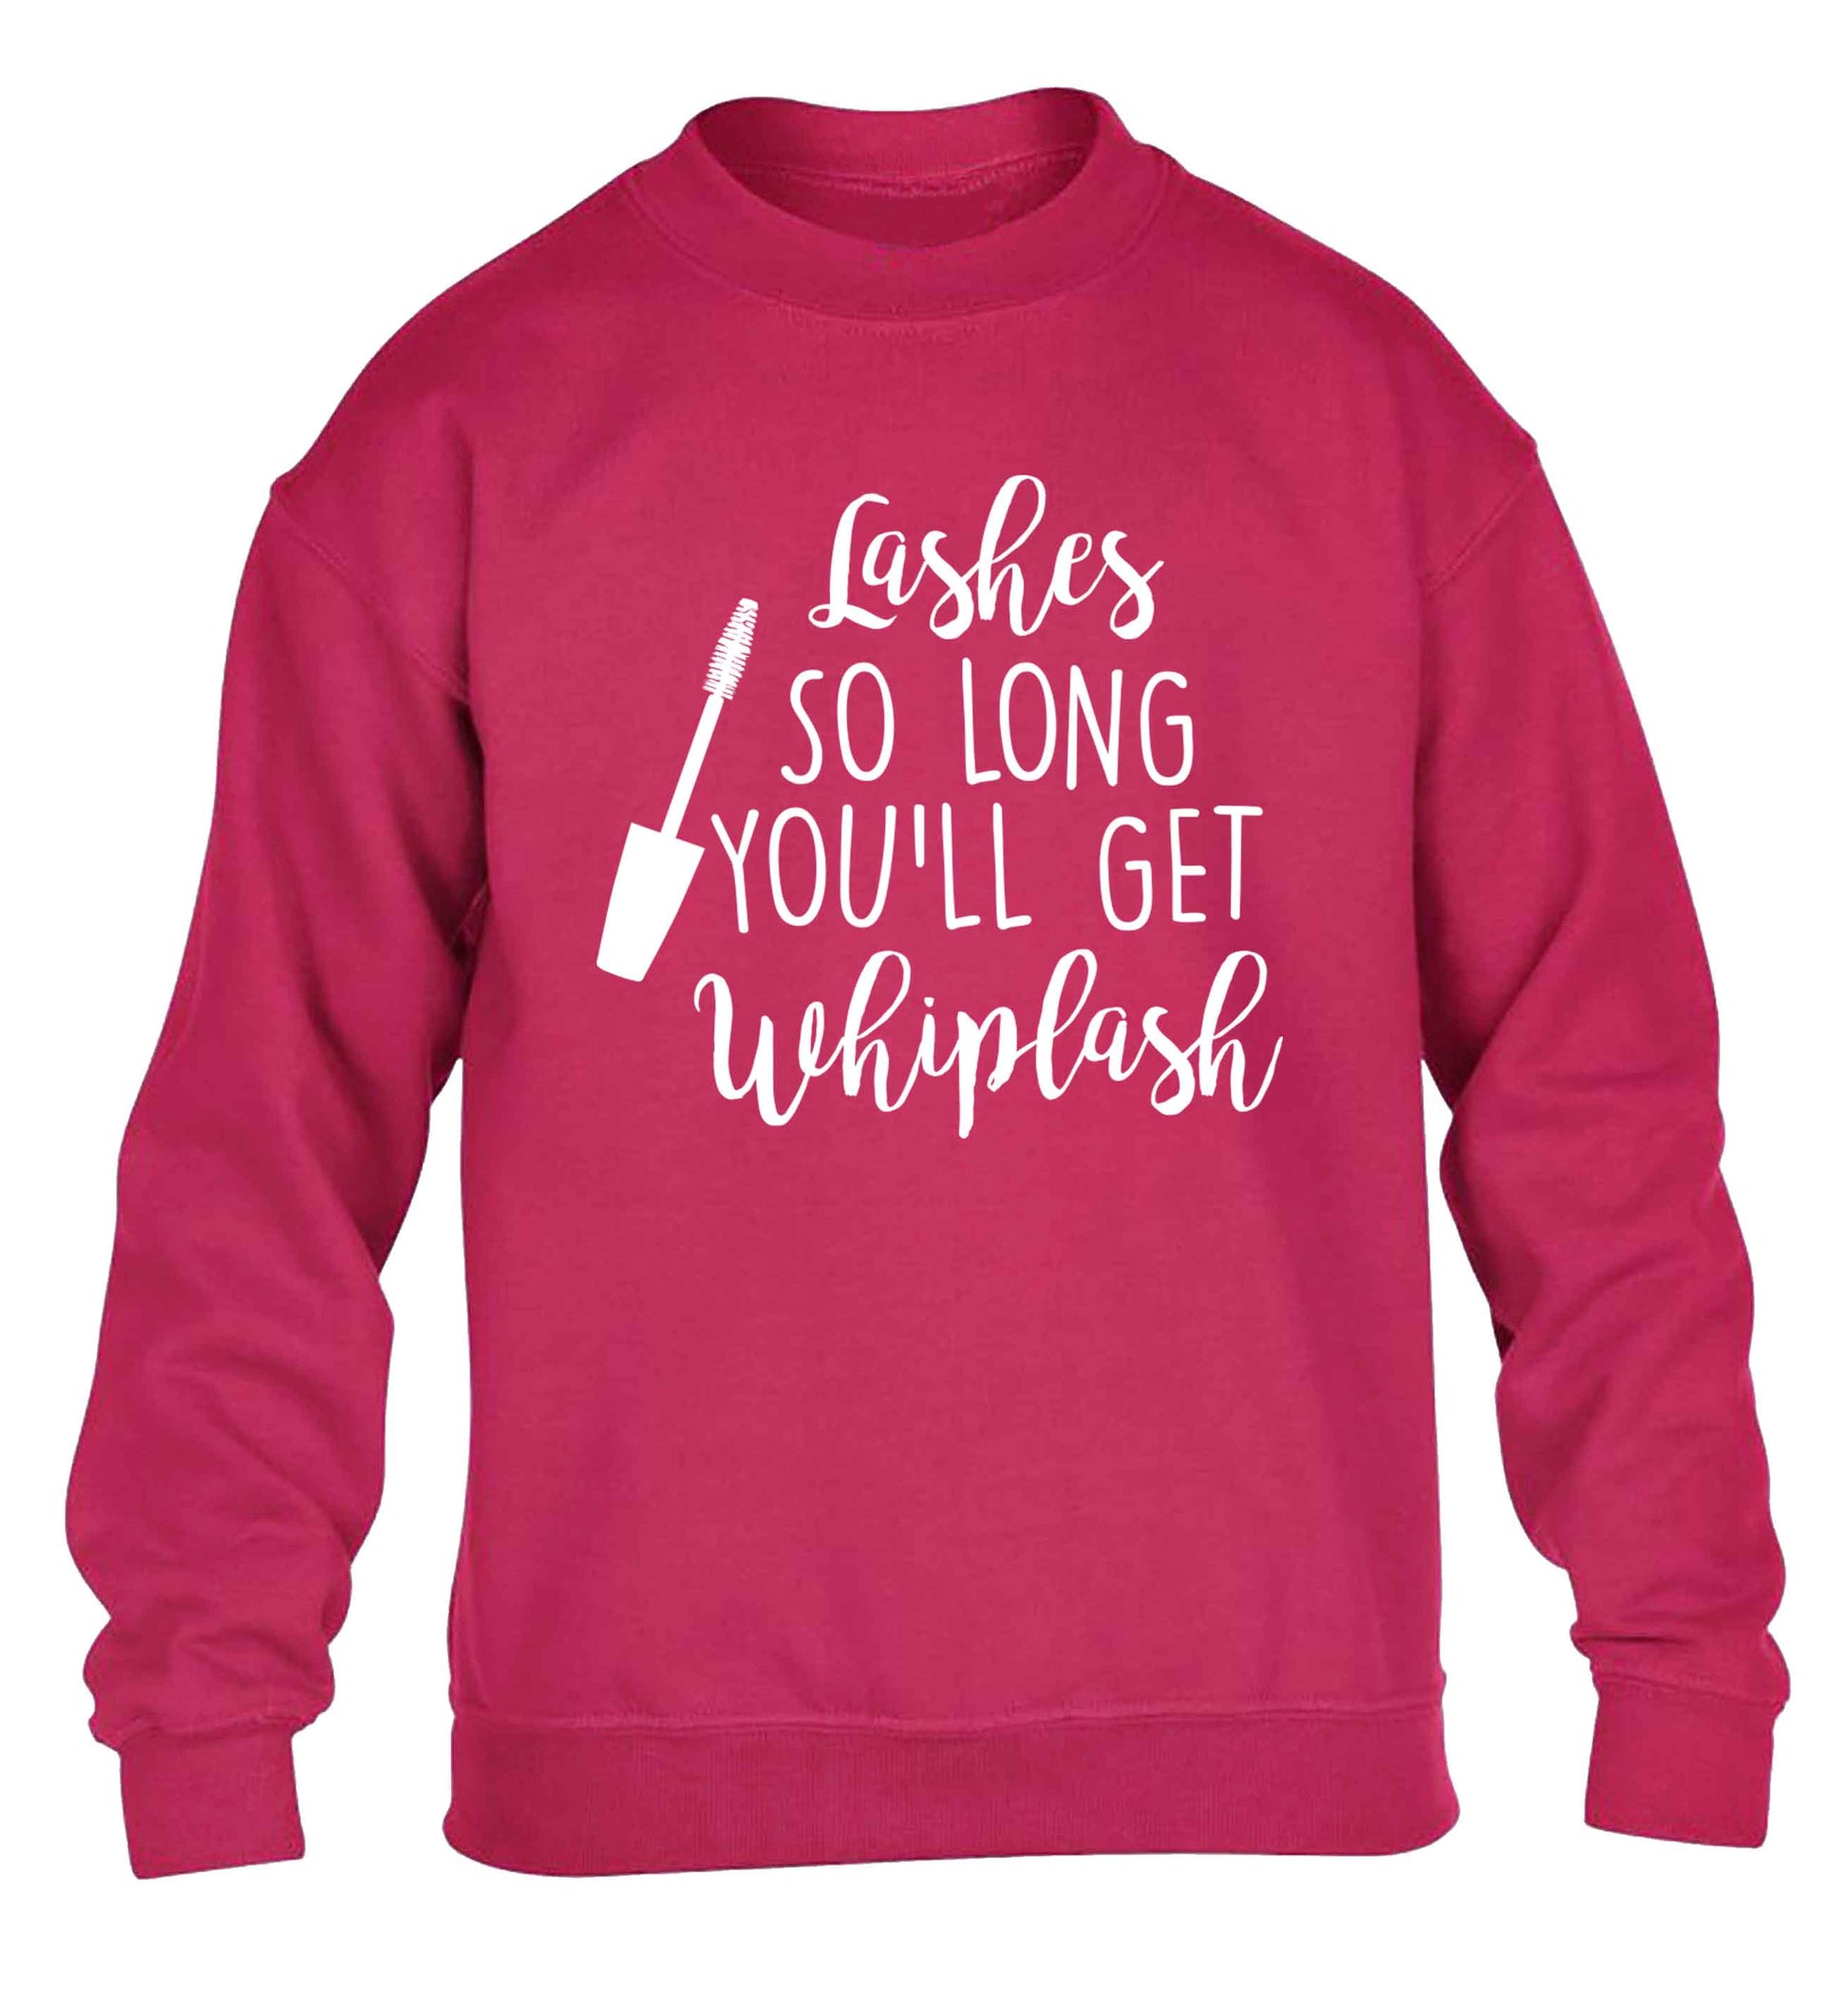 Lashes so long you'll get whiplash children's pink sweater 12-13 Years